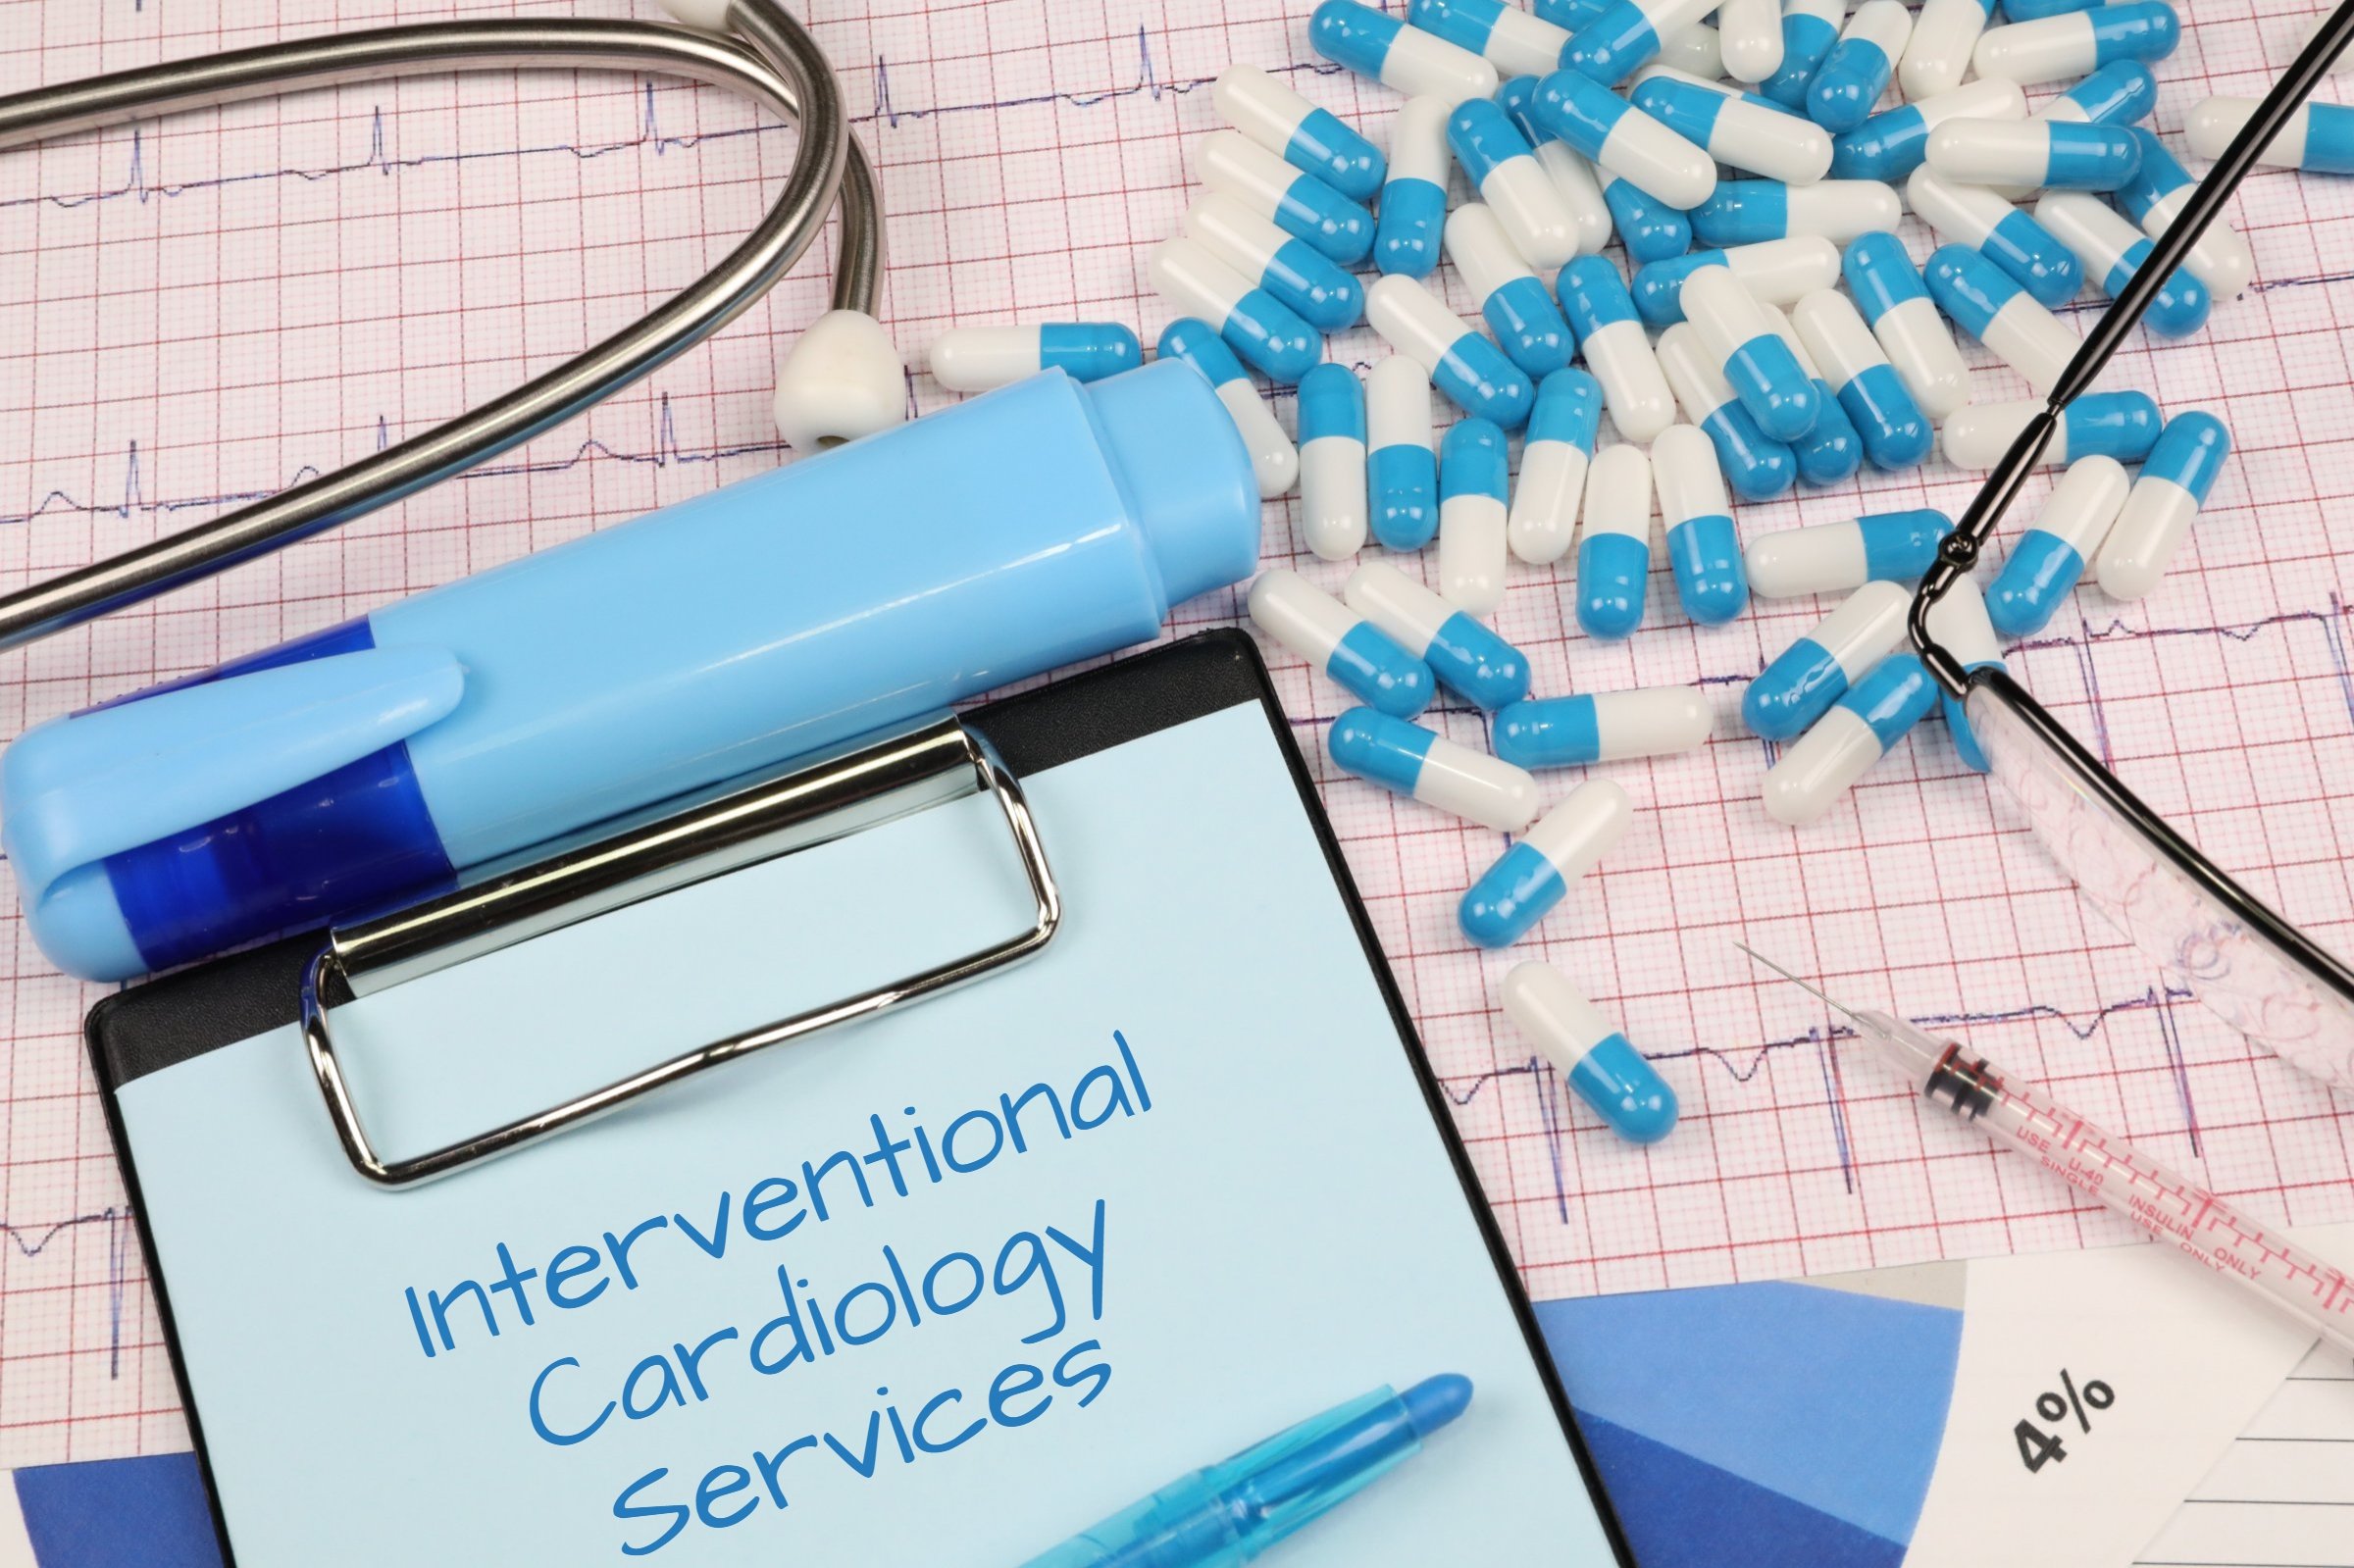 interventional cardiology services